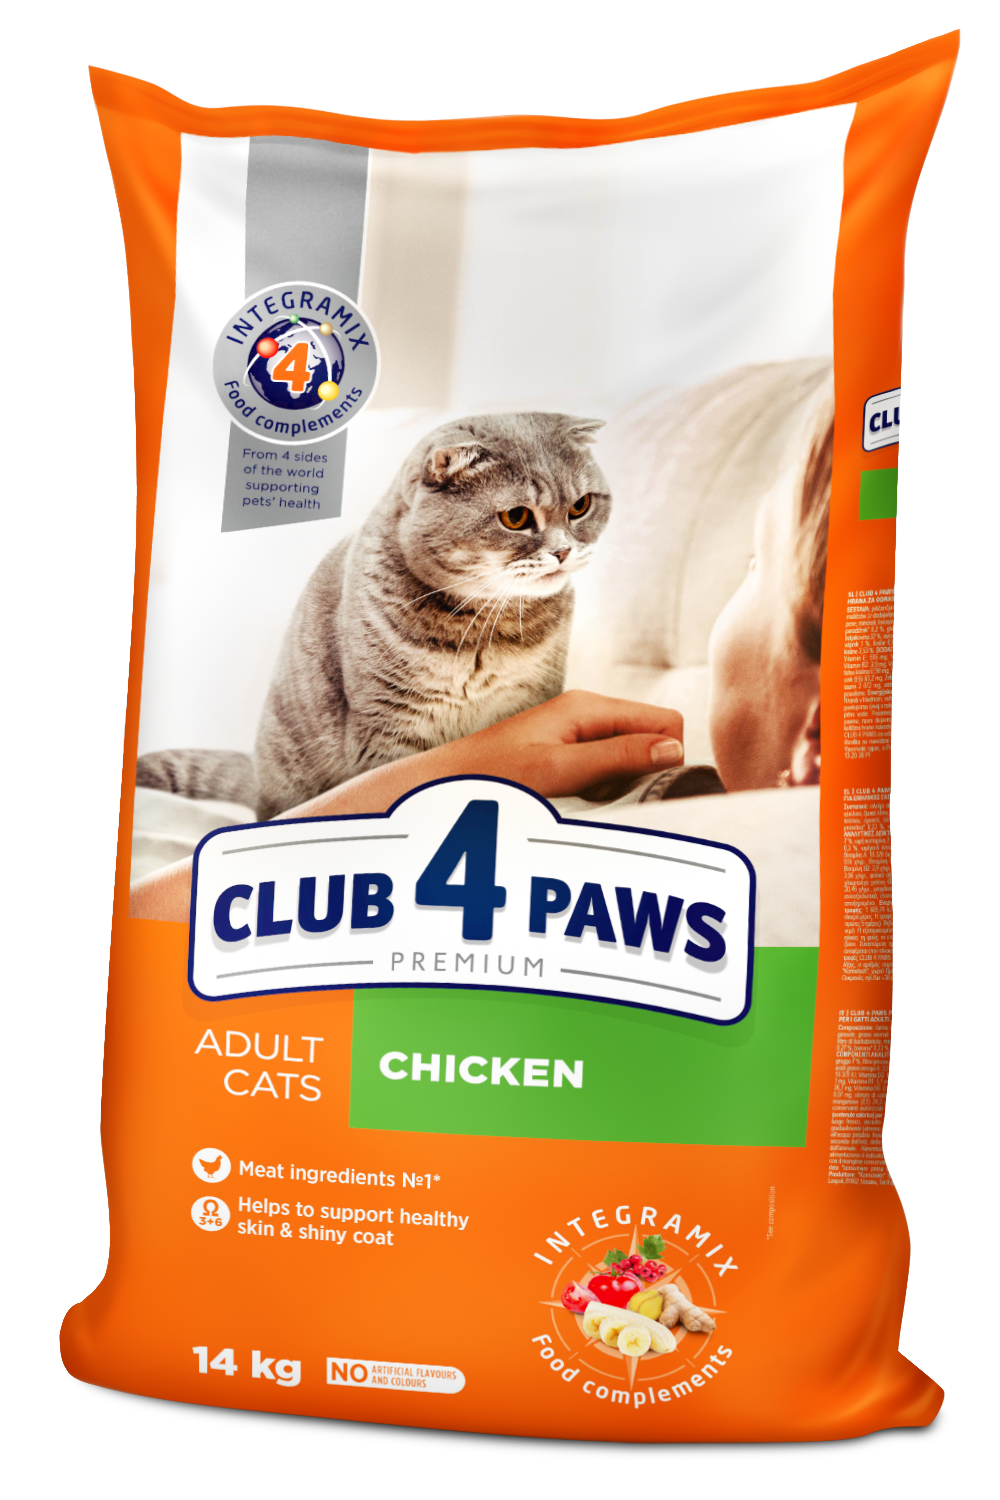 CLUB 4 PAWS Premium with Chicken. Complete Dry Food for Adult Cats